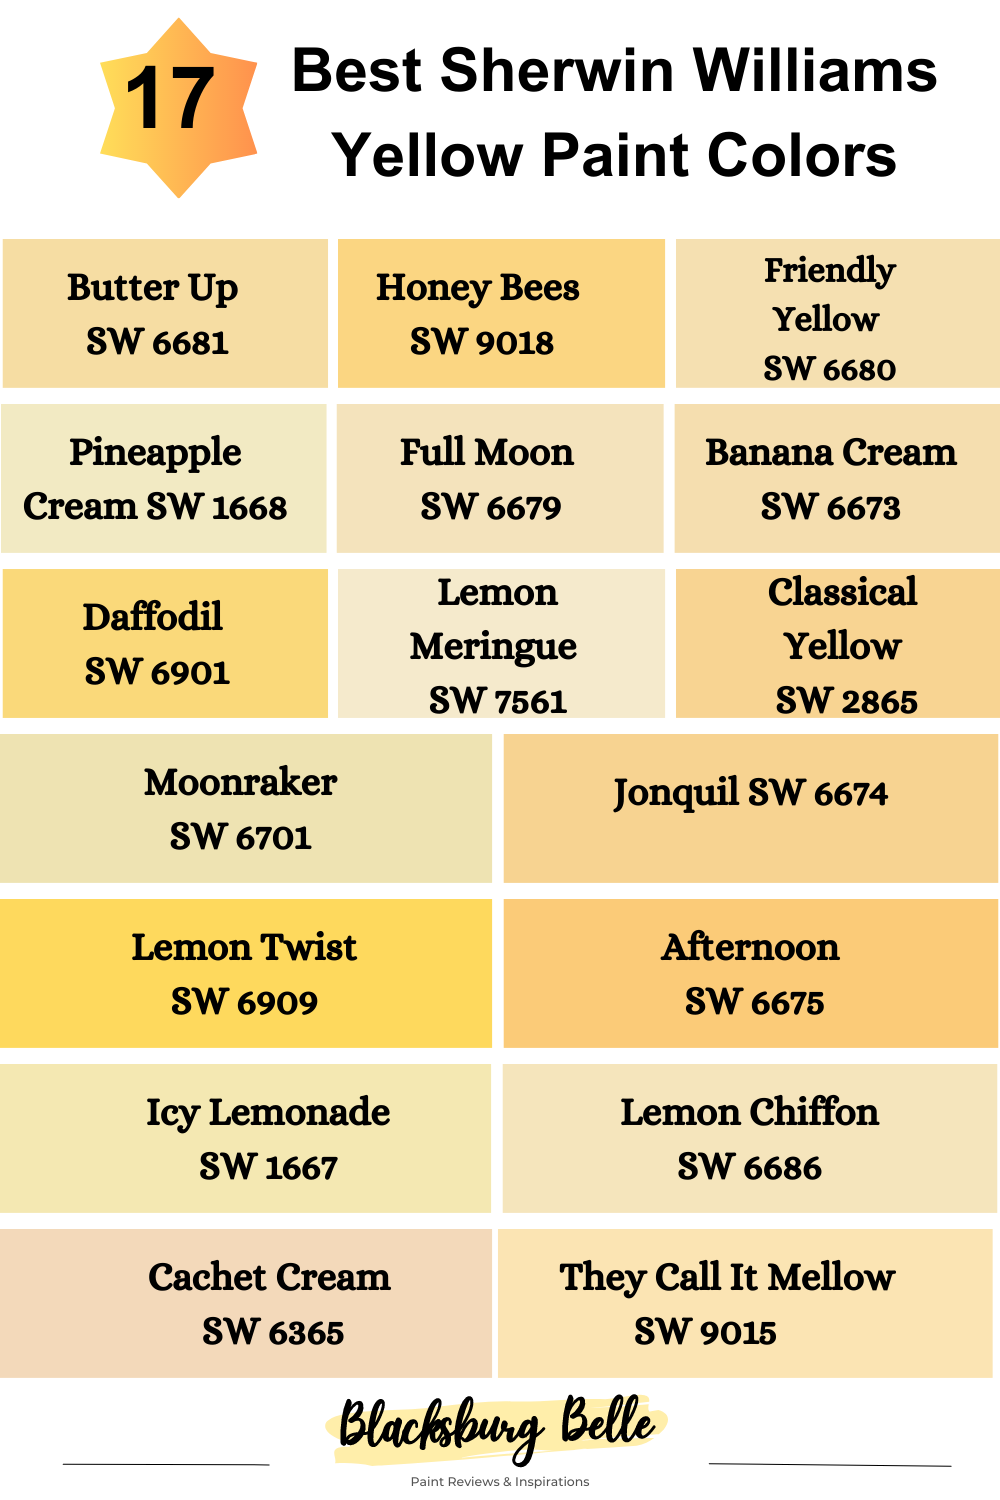 17 Best Sherwin Williams Yellow Paint Colors